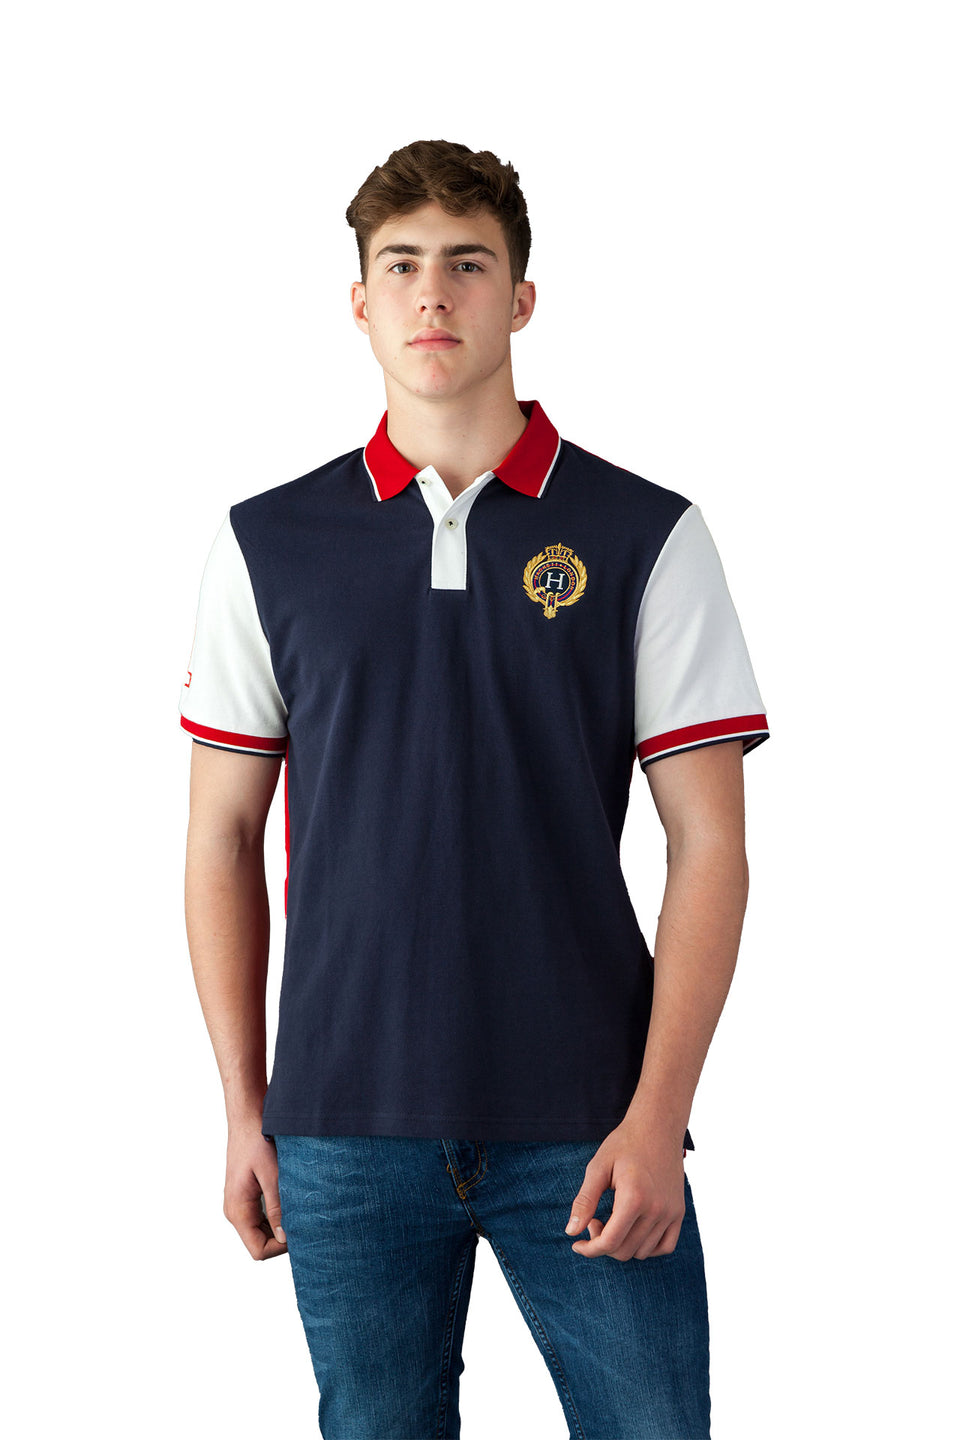 Hackett London Polo Shirt Multi Colour Navy And Red - Camden Connaught